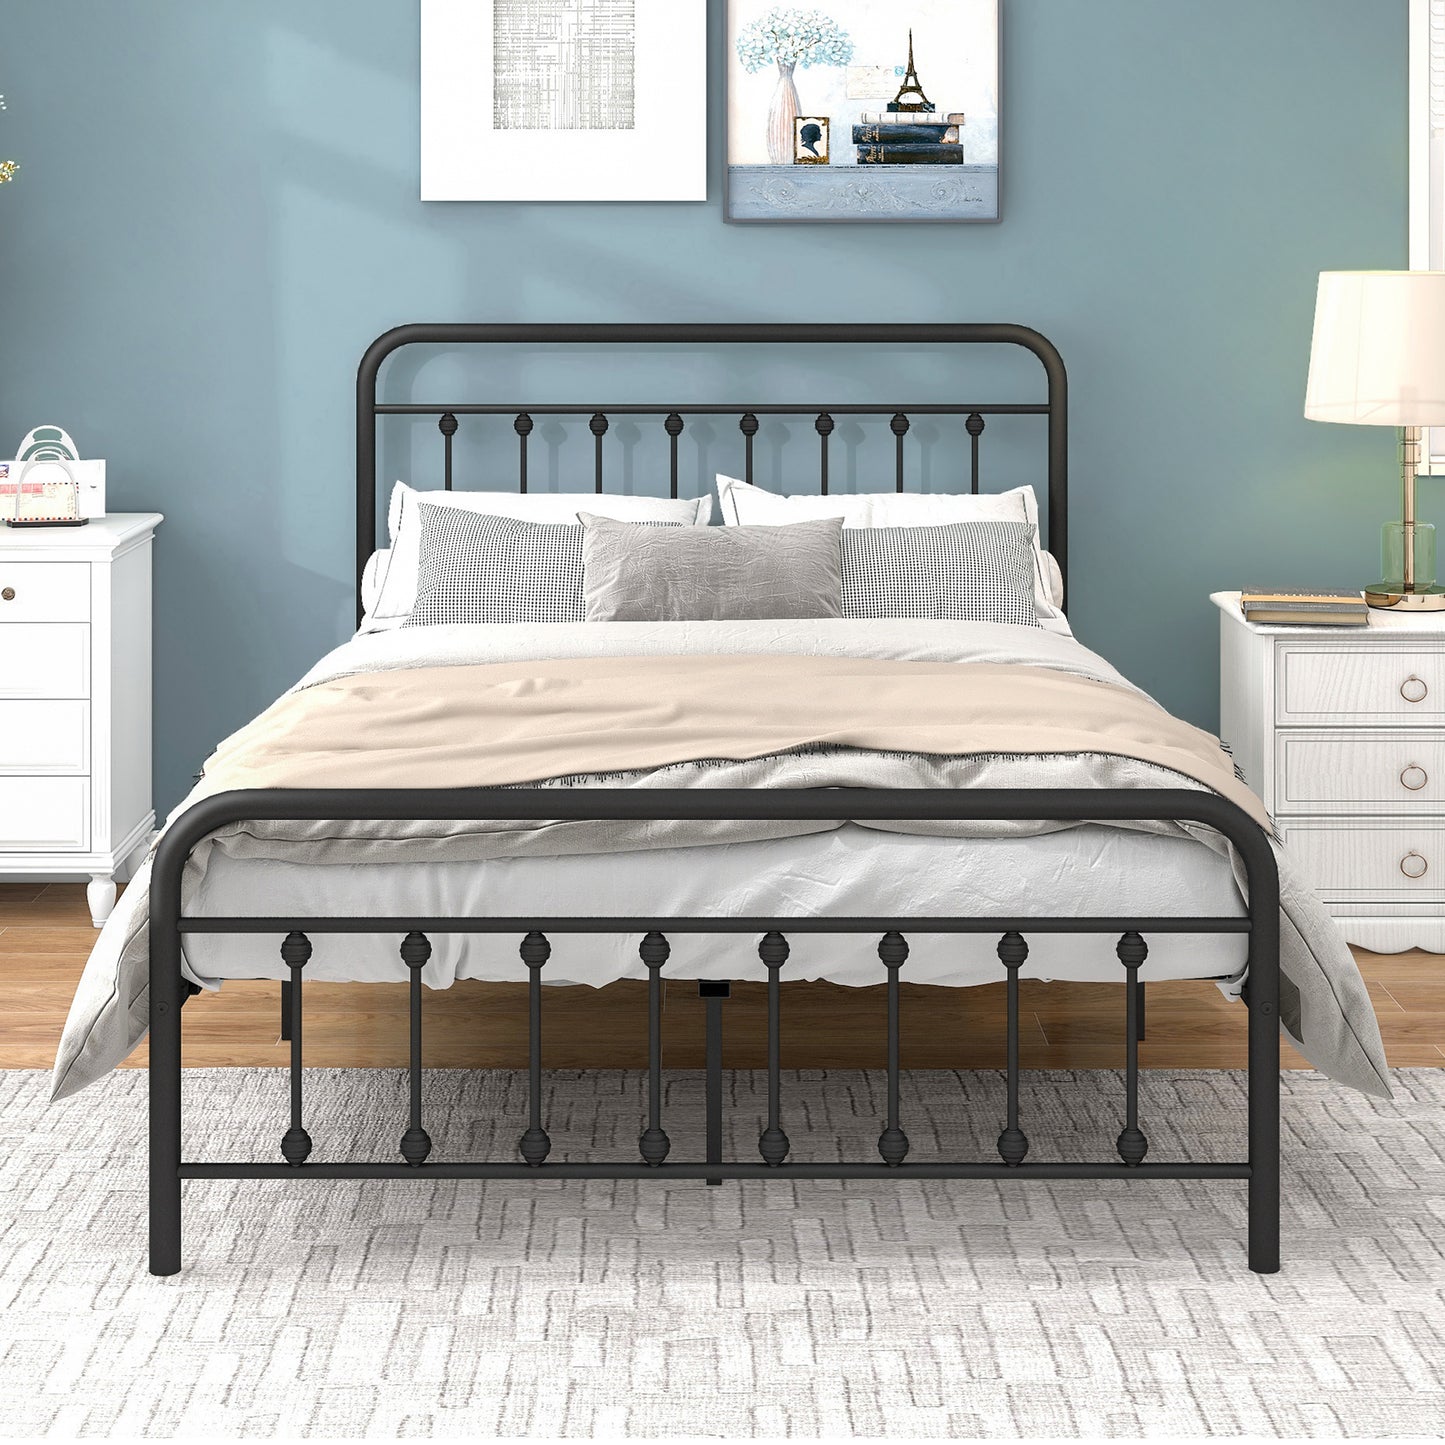 Platform Bed Frame Full Size with Vintage Headboard and Footboard, New Upgraded Metal Legs Support, No Box Spring Needed, Heavy Duty Steel Full Bed Frame with 500LBS Weight Capacity, Black